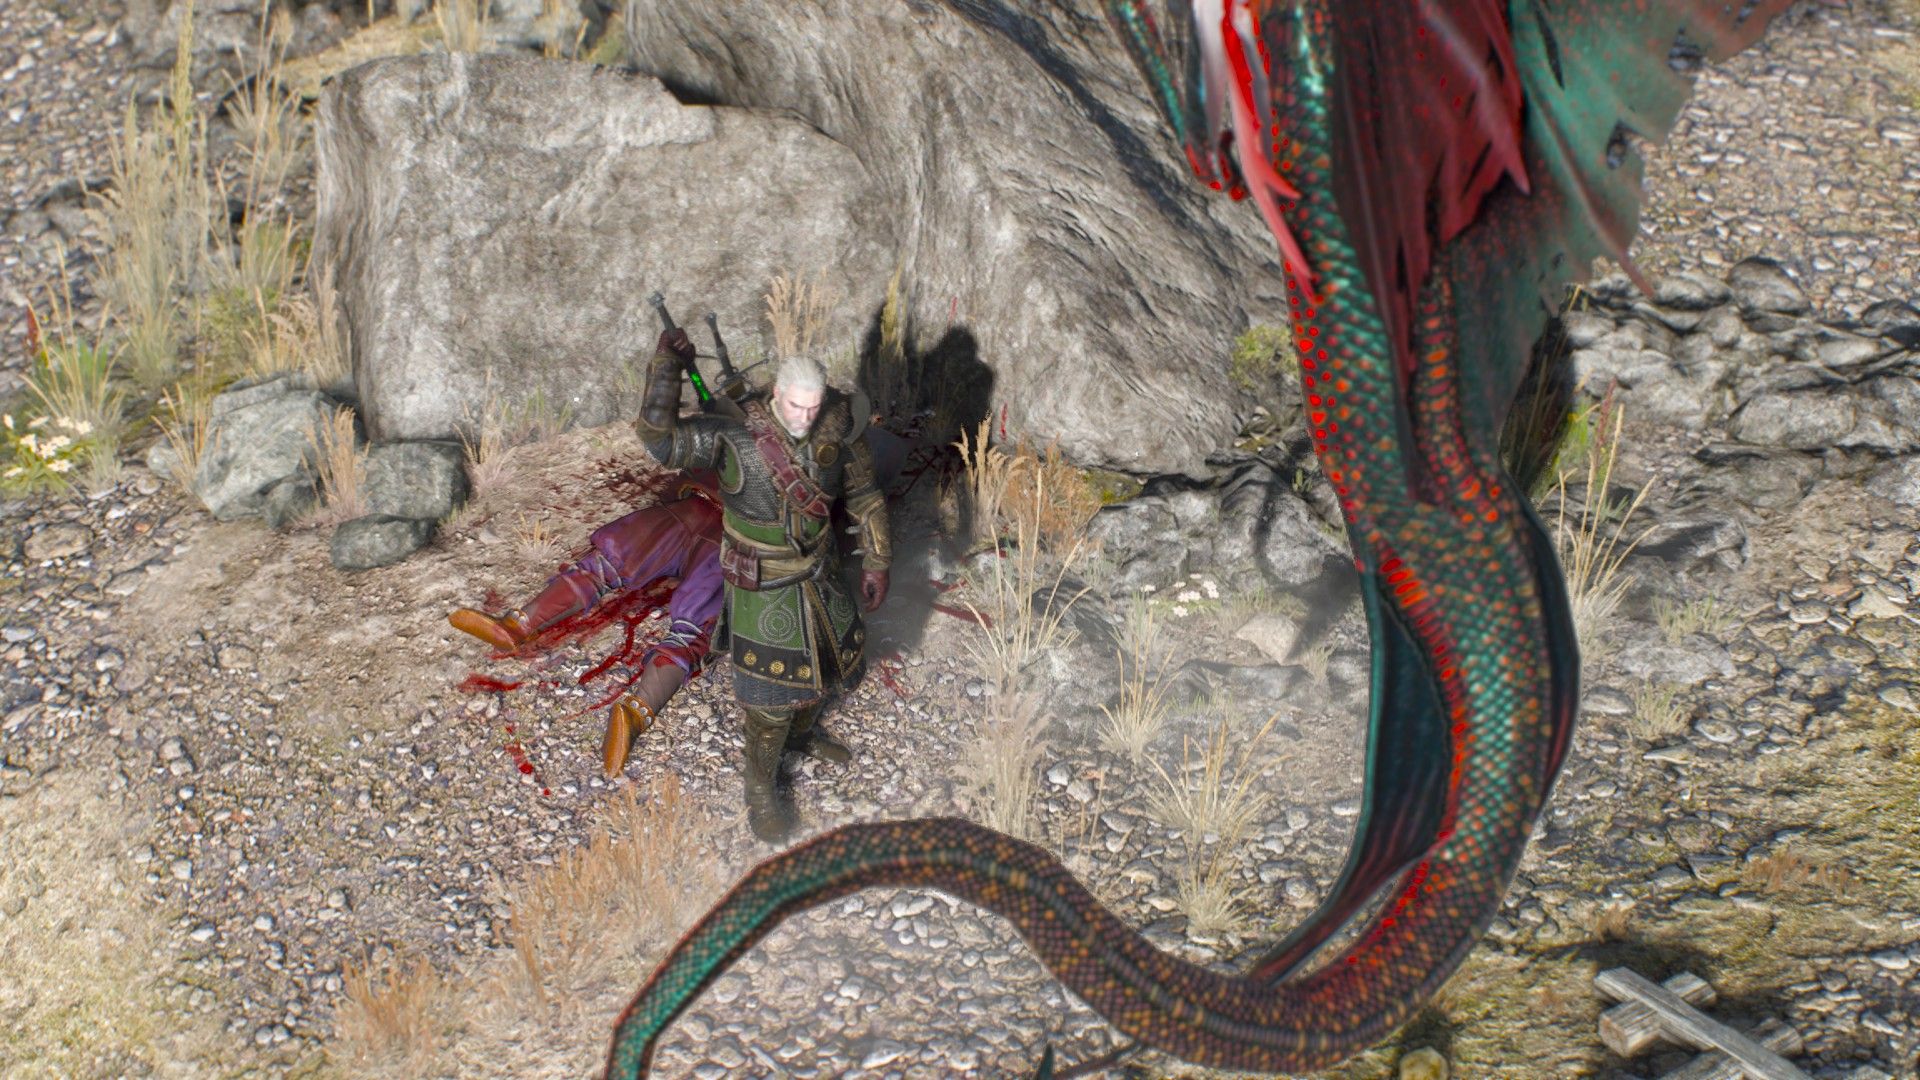 Geralt stands in front of the corpse and draws his sword as he prepares to fight the monsters flying above.